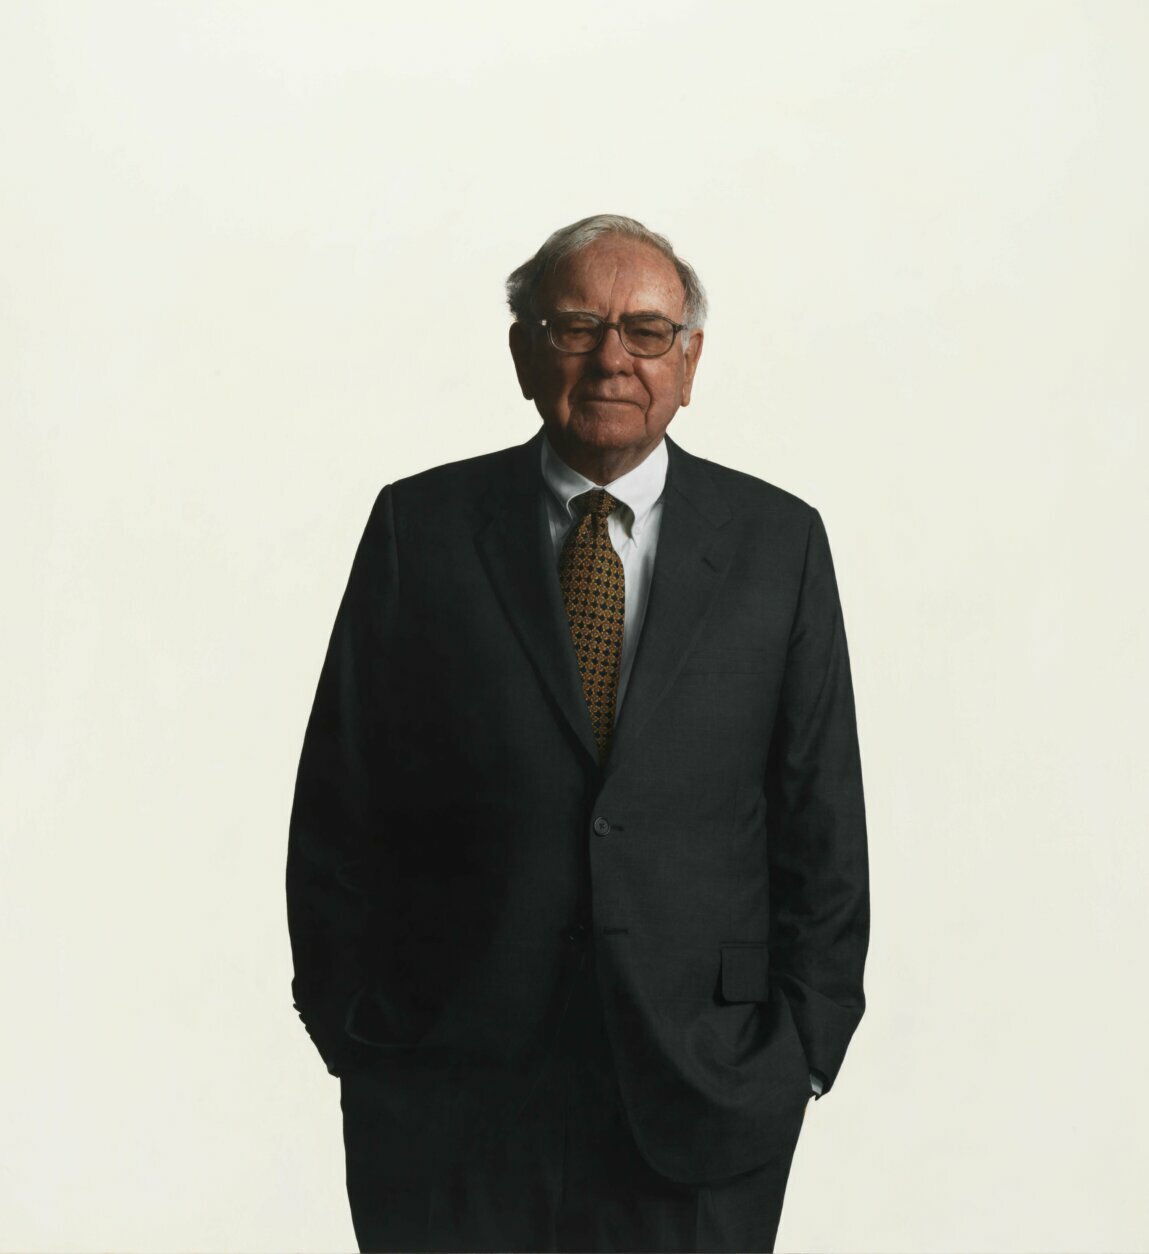 <p>This oil-on-canvas portrait of Warren Buffett was painted by Robert McCurdy in 2013.</p>
<p><em>WTOP&#8217;s Kristi King contributed to this report.</em></p>
